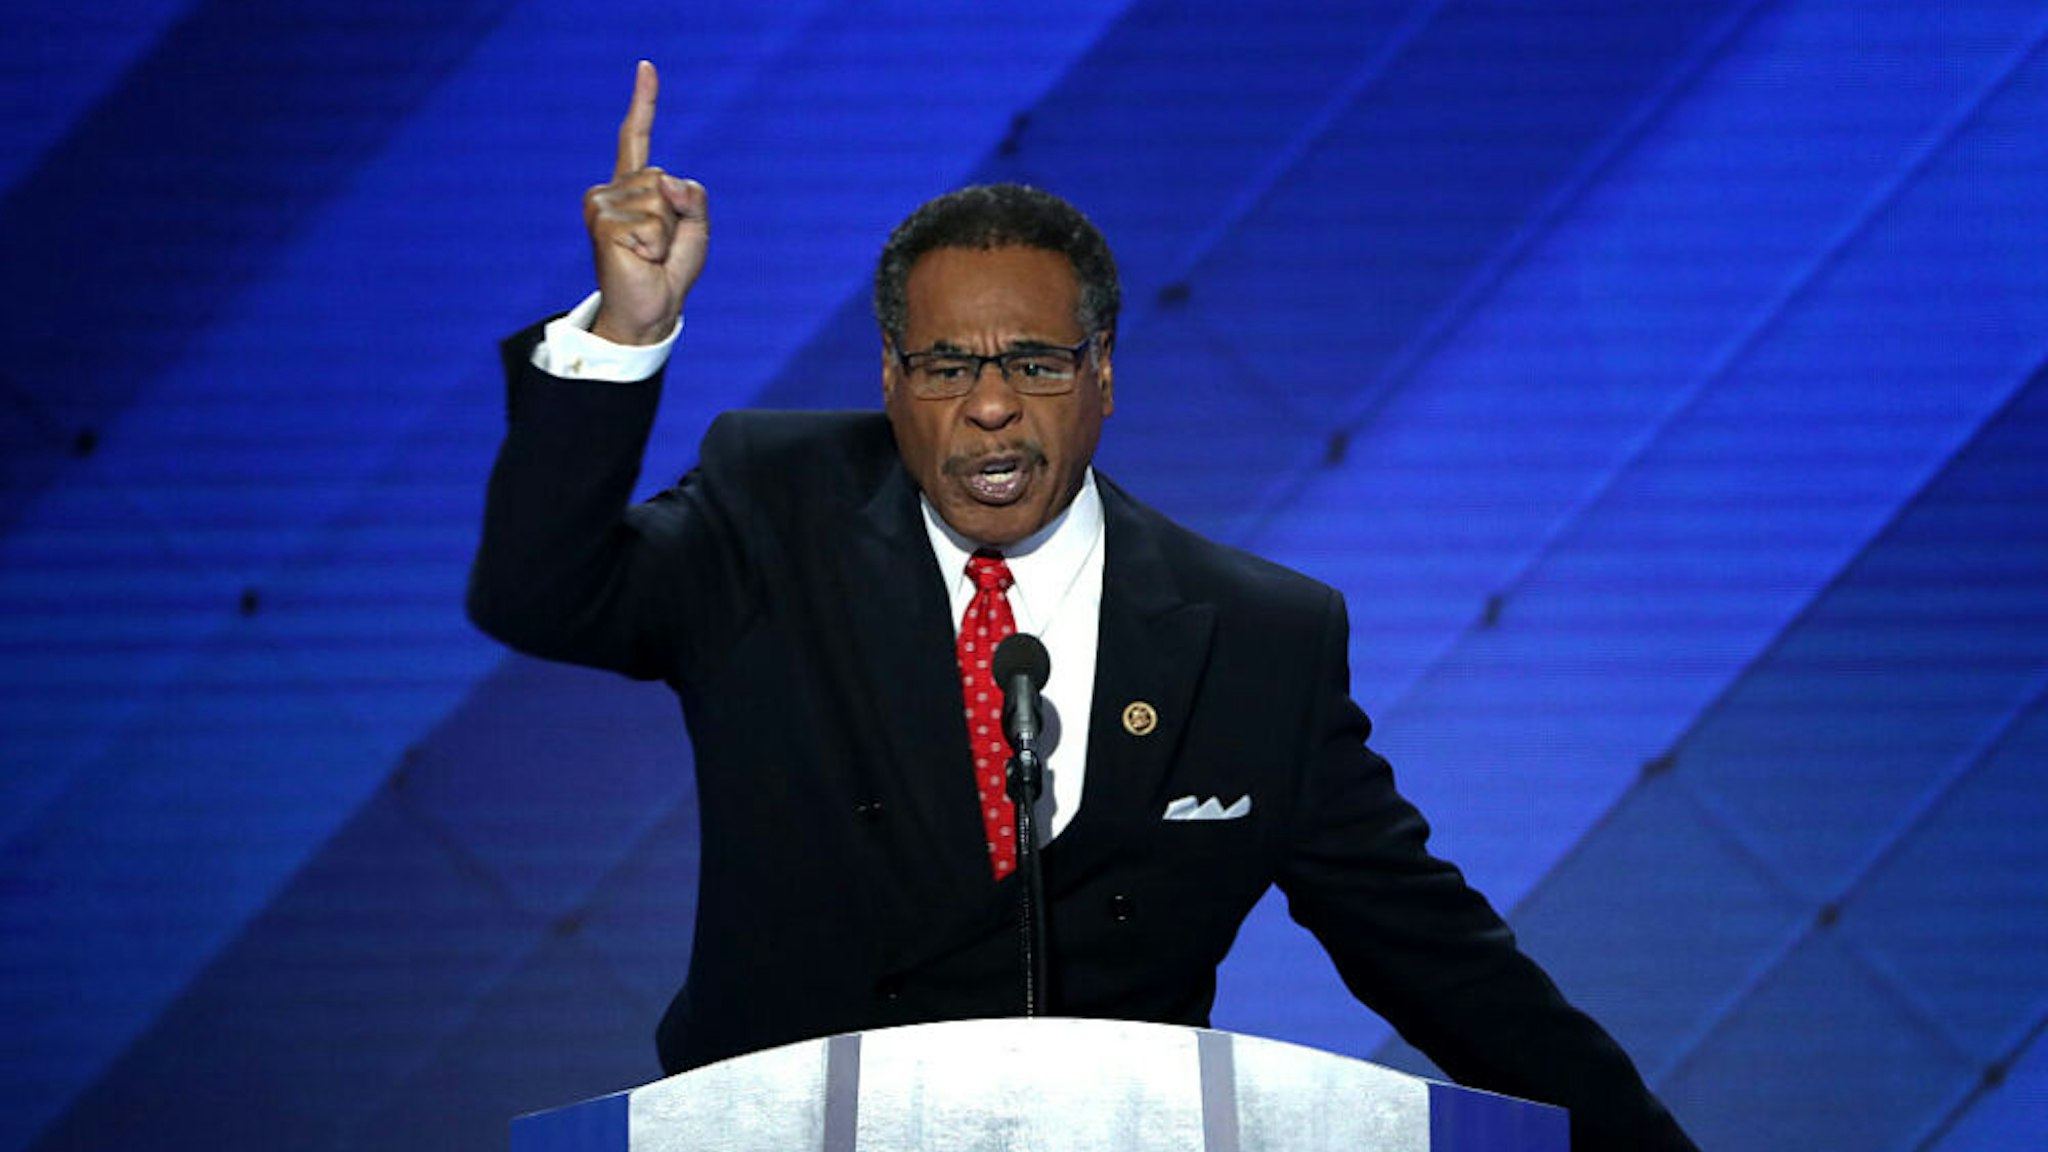 PHILADELPHIA, PA - JULY 28: U.S. Representative Emanuel Cleaver (D-MO) delivers remarks on the fourth day of the Democratic National Convention at the Wells Fargo Center, July 28, 2016 in Philadelphia, Pennsylvania. Democratic presidential candidate Hillary Clinton received the number of votes needed to secure the party's nomination. An estimated 50,000 people are expected in Philadelphia, including hundreds of protesters and members of the media. The four-day Democratic National Convention kicked off July 25.